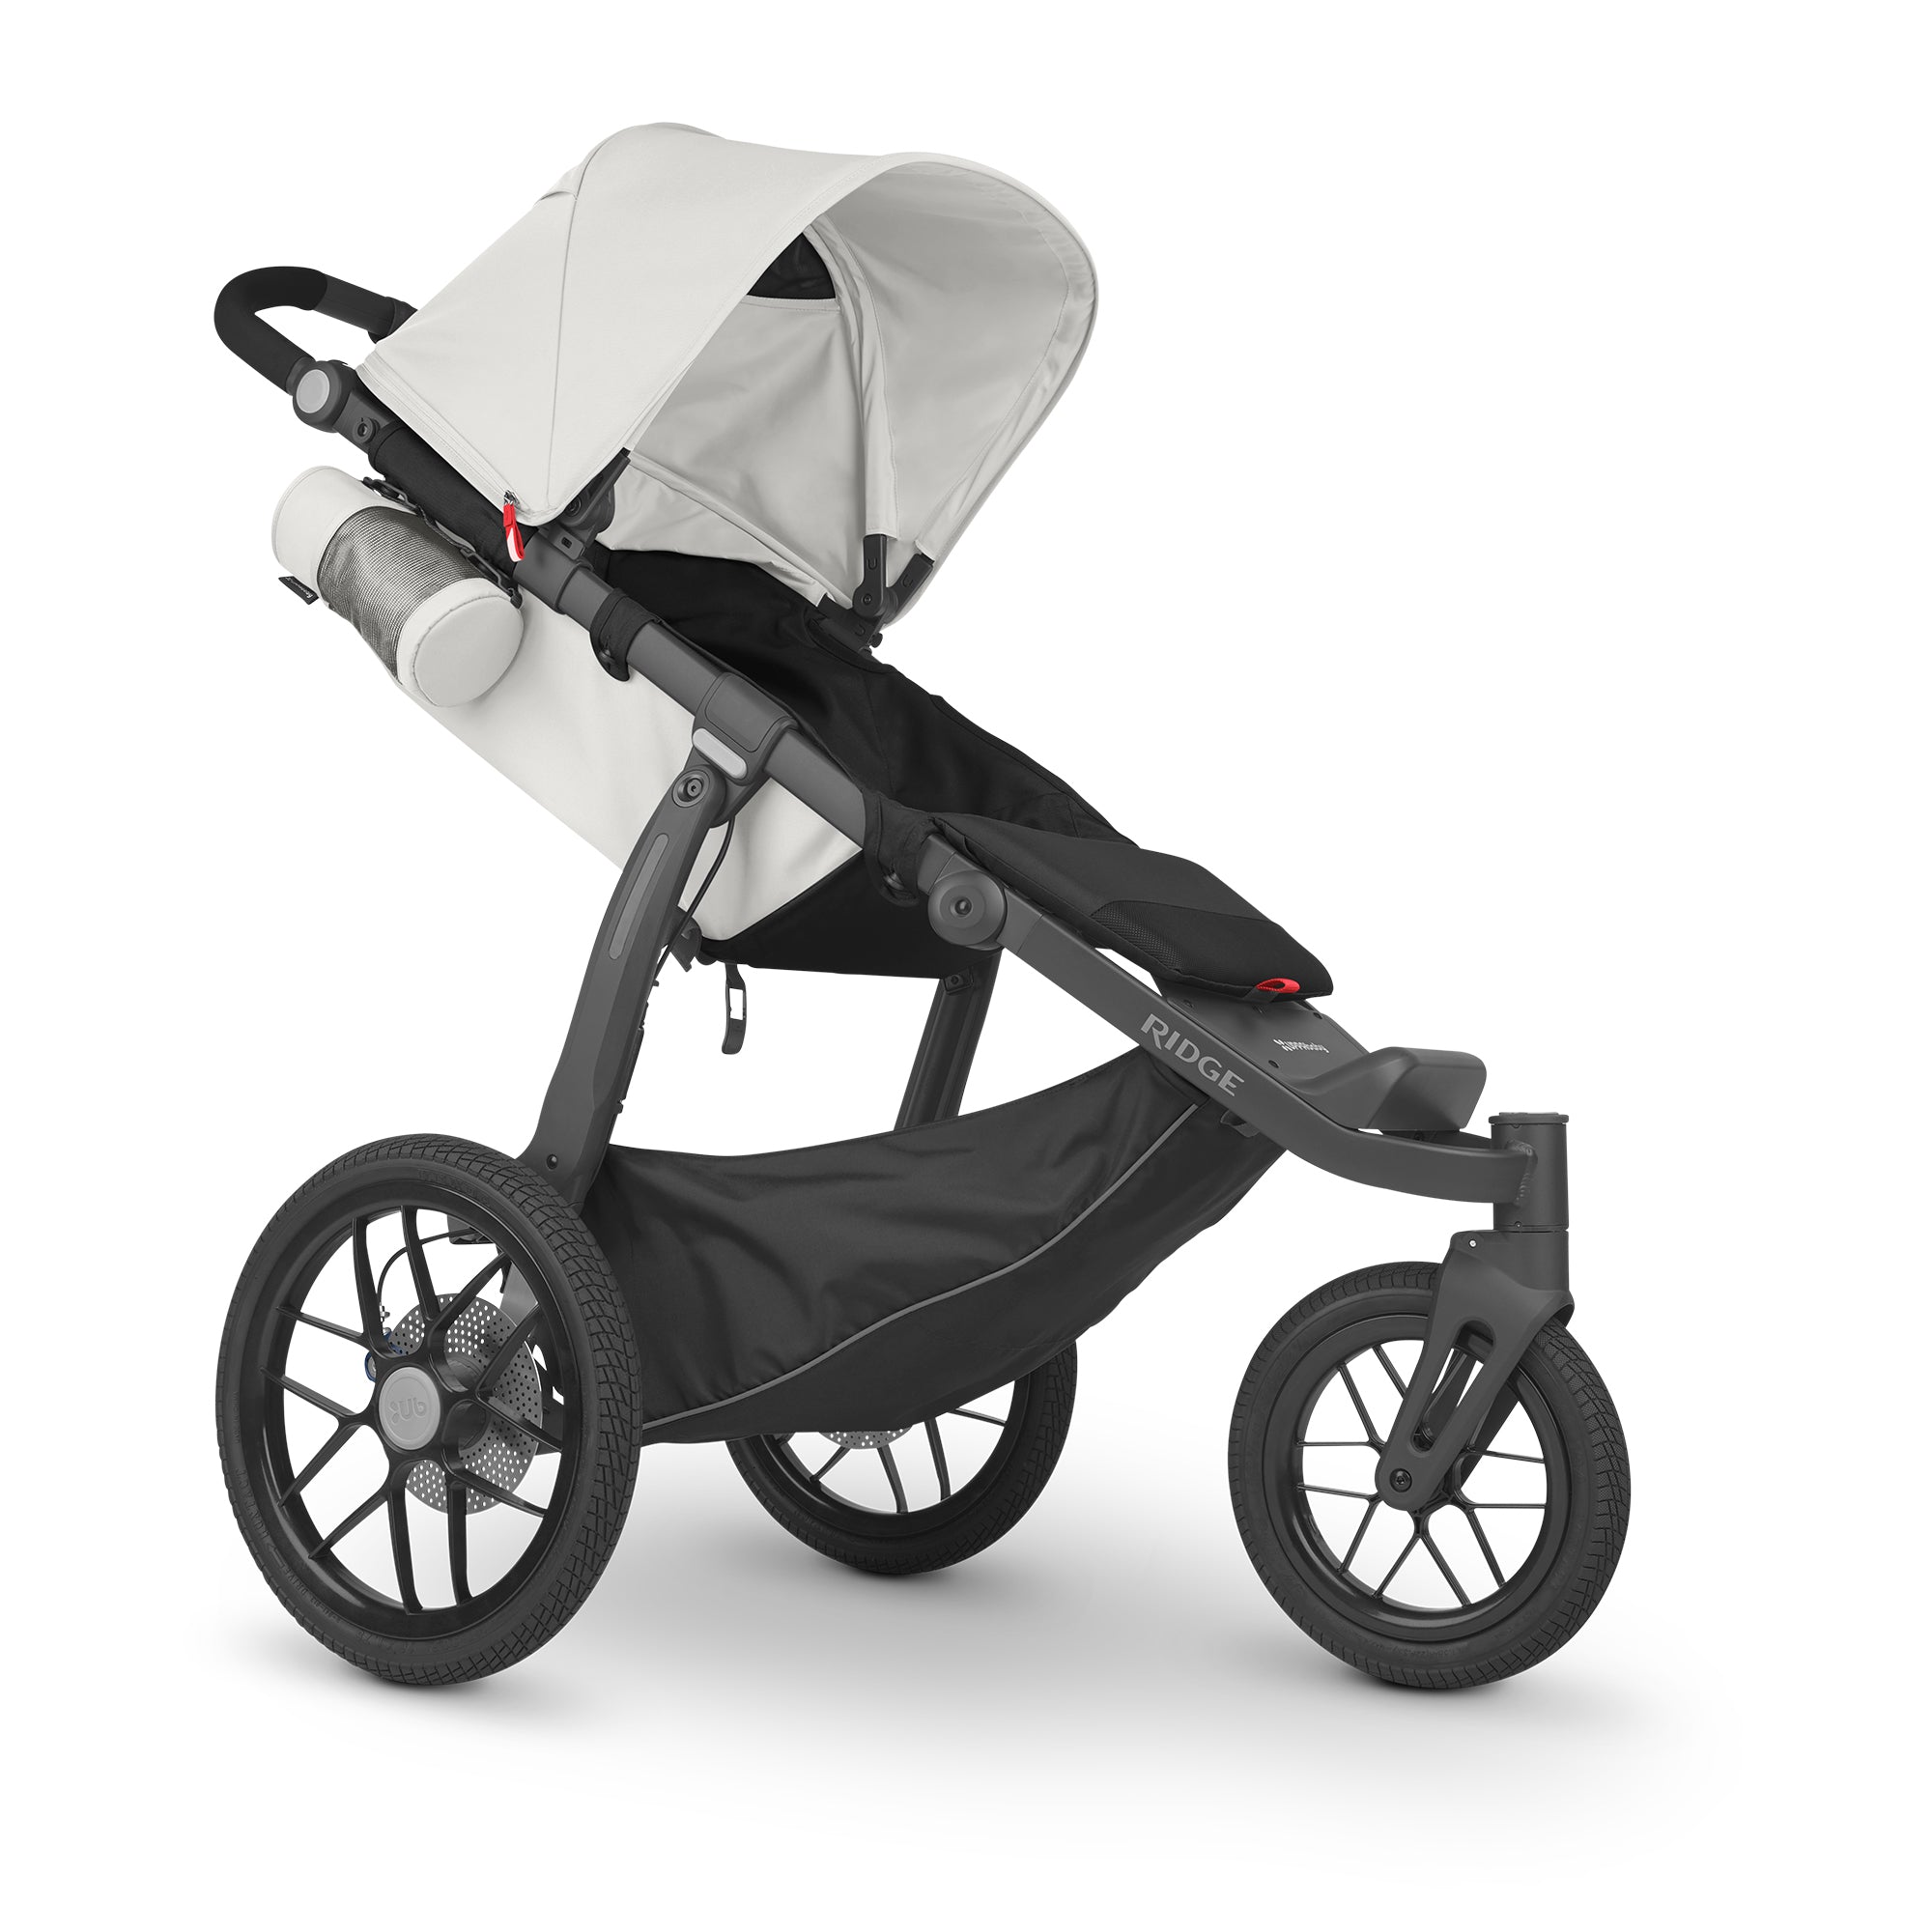 UPPAbaby RIDGE All-Terrain Stroller - Bryce (White/Carbon) 3